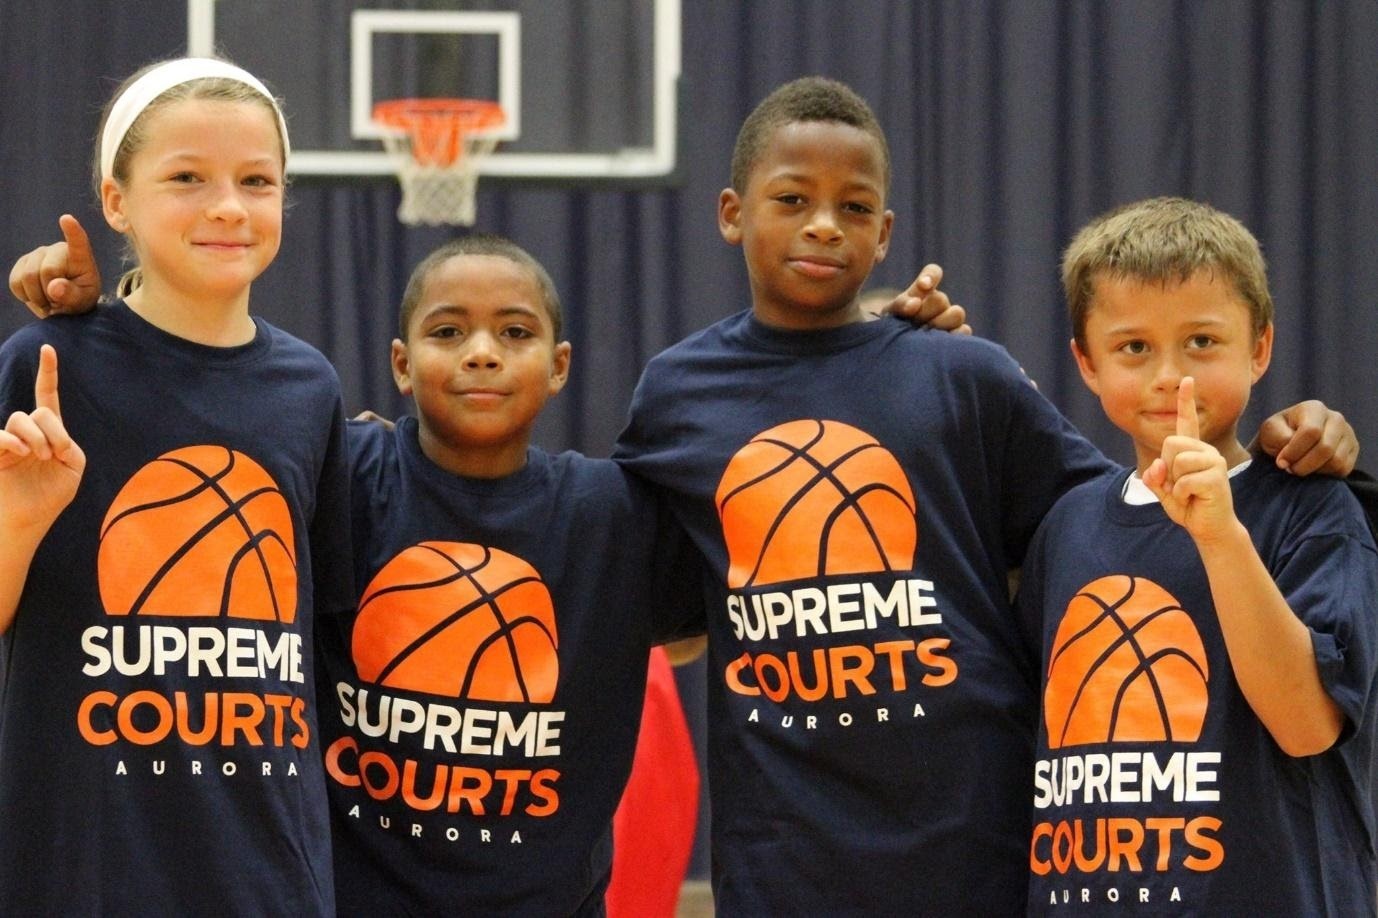 Chicago-based Supreme Courts is one of the most trusted and highly reputed professional basketball courts in Chicago